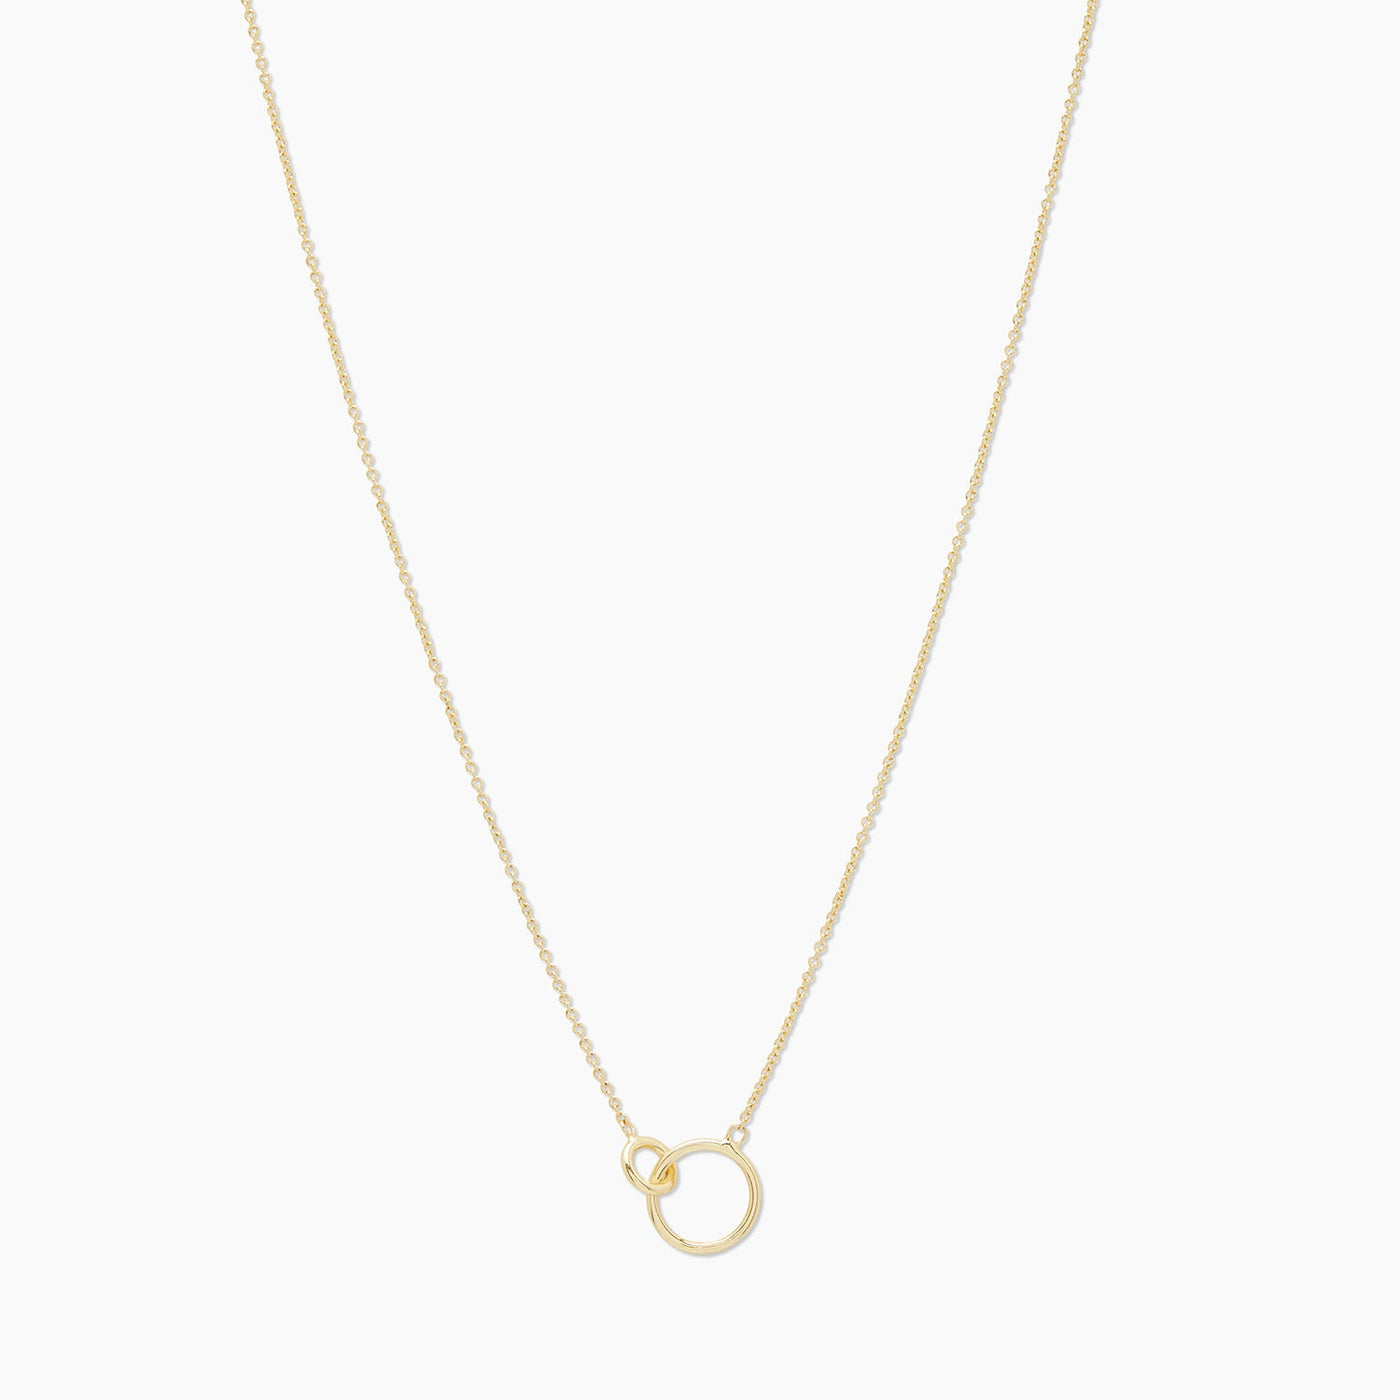 Wilshire Charm Adjustable Necklace Gold